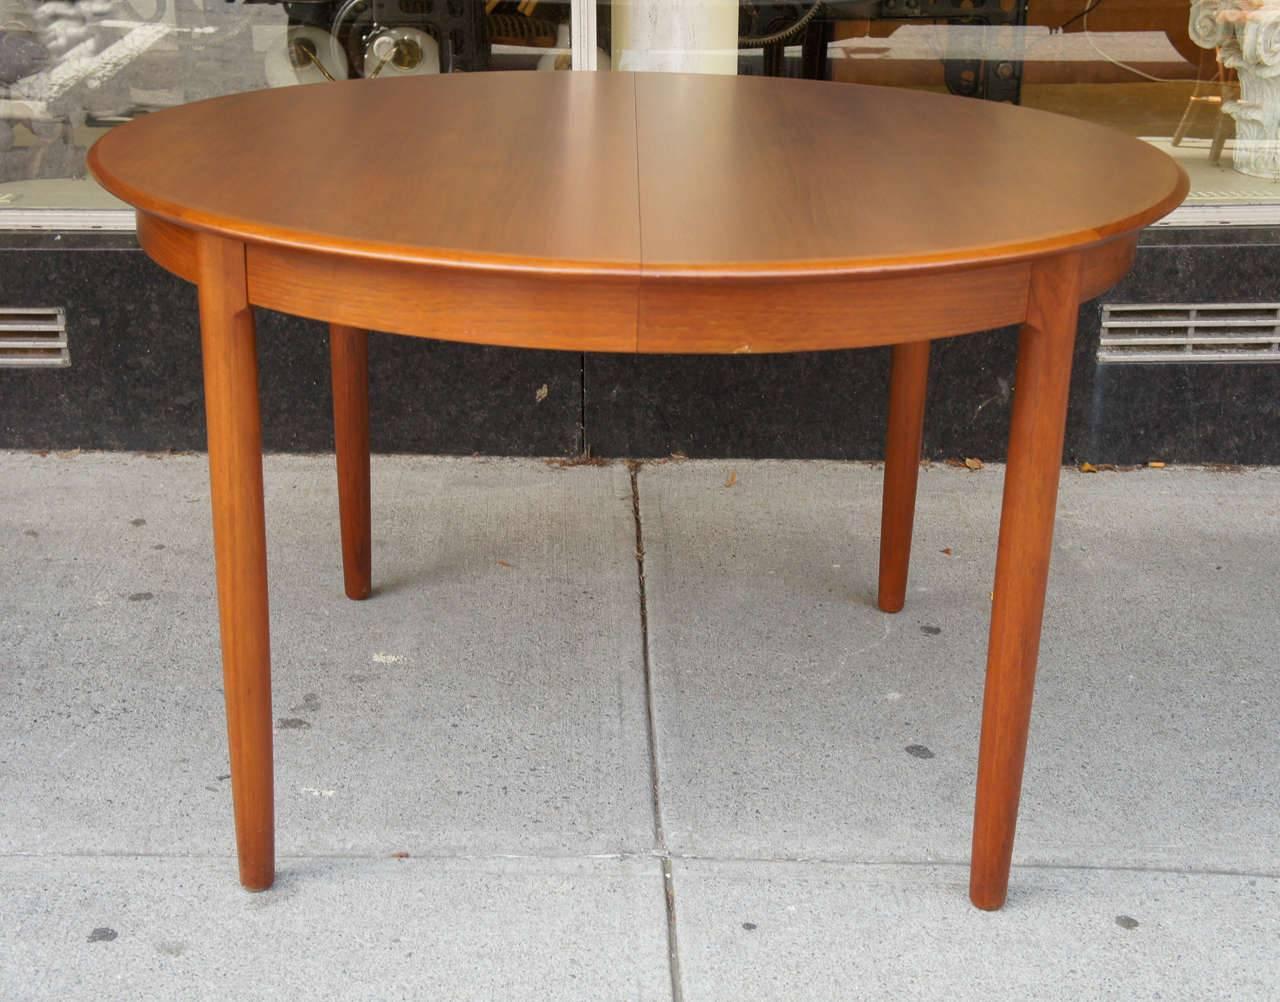 Classic Danish Modern dining table in teak
The table with a nicely figured top with cross-banded edge on four tapered legs. The table with two 19 7/8